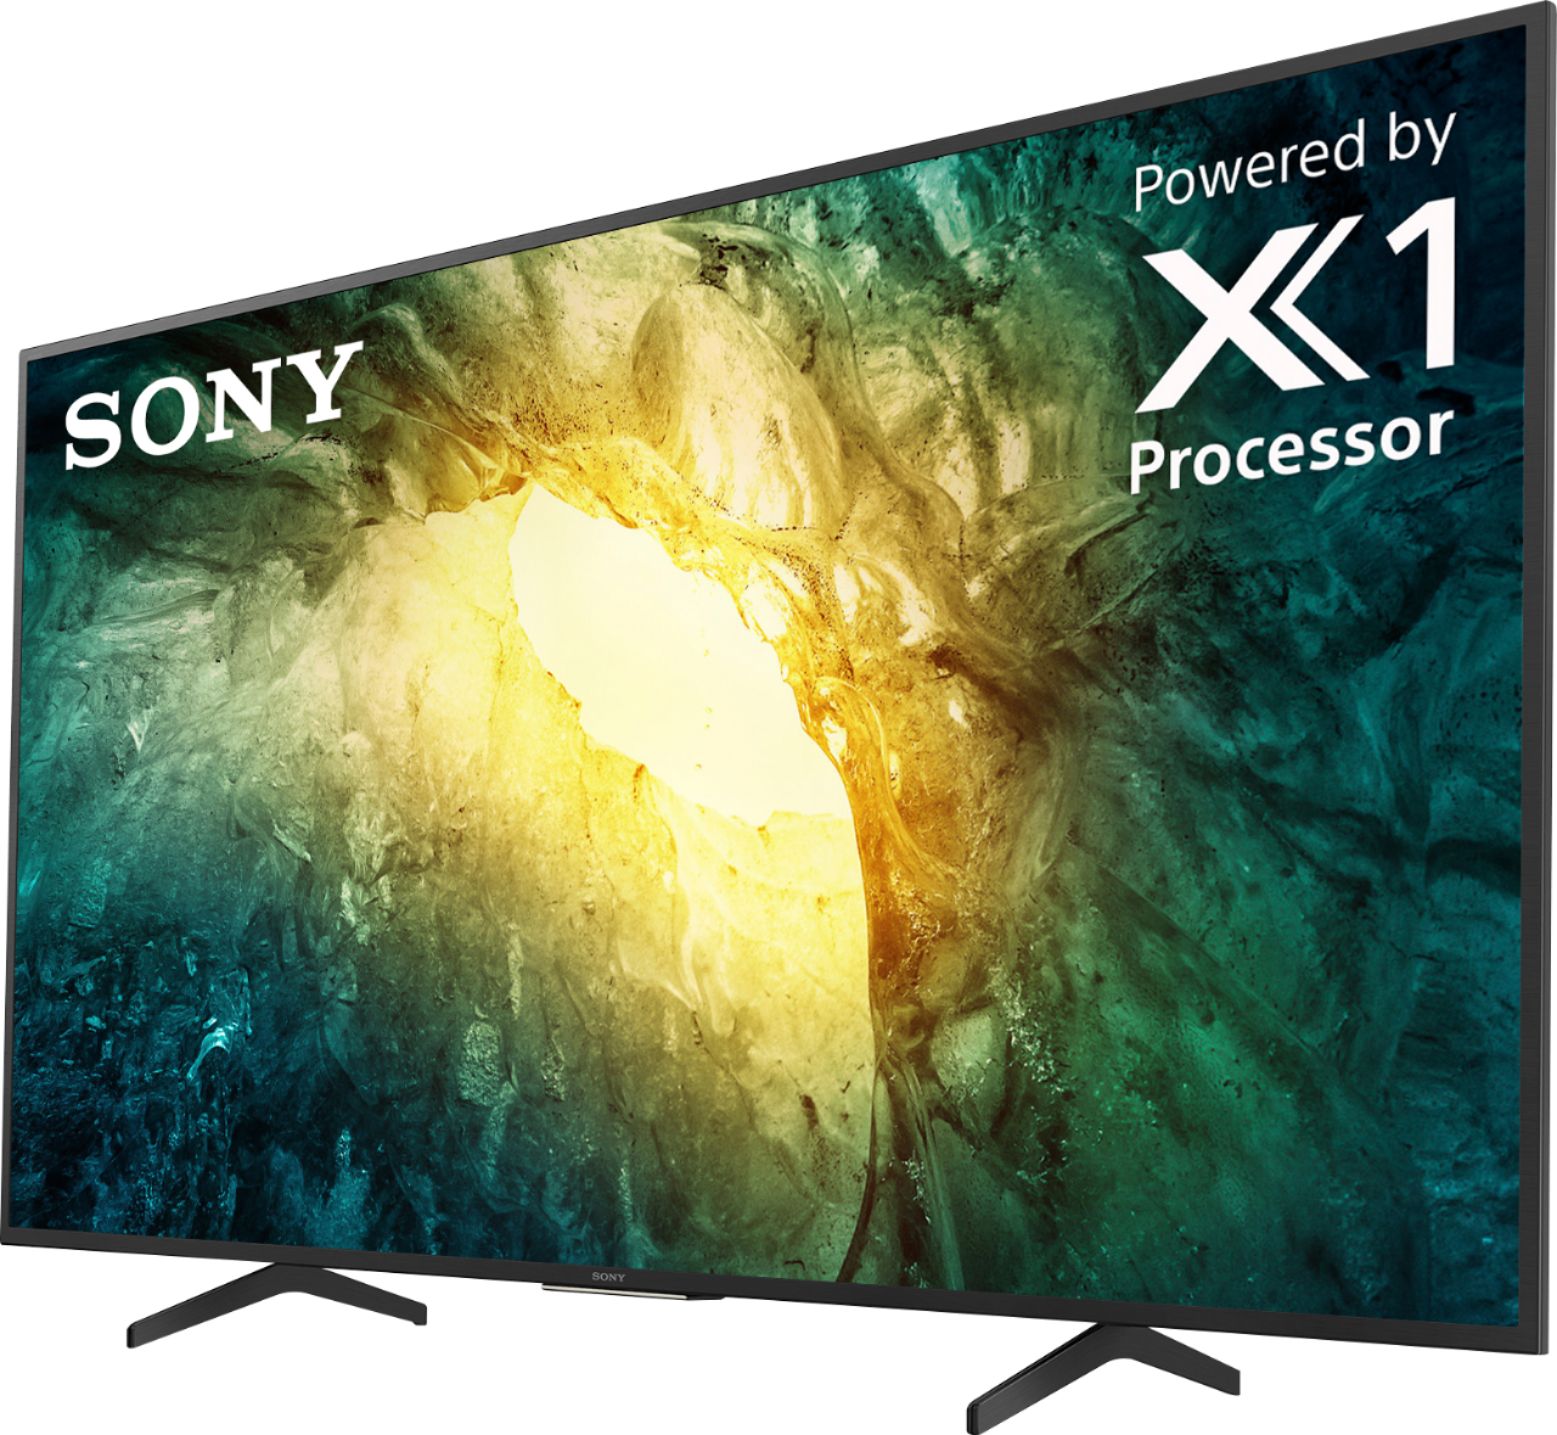 Left View: Sony - 65" Class X750H Series LED 4K UHD Smart Android TV